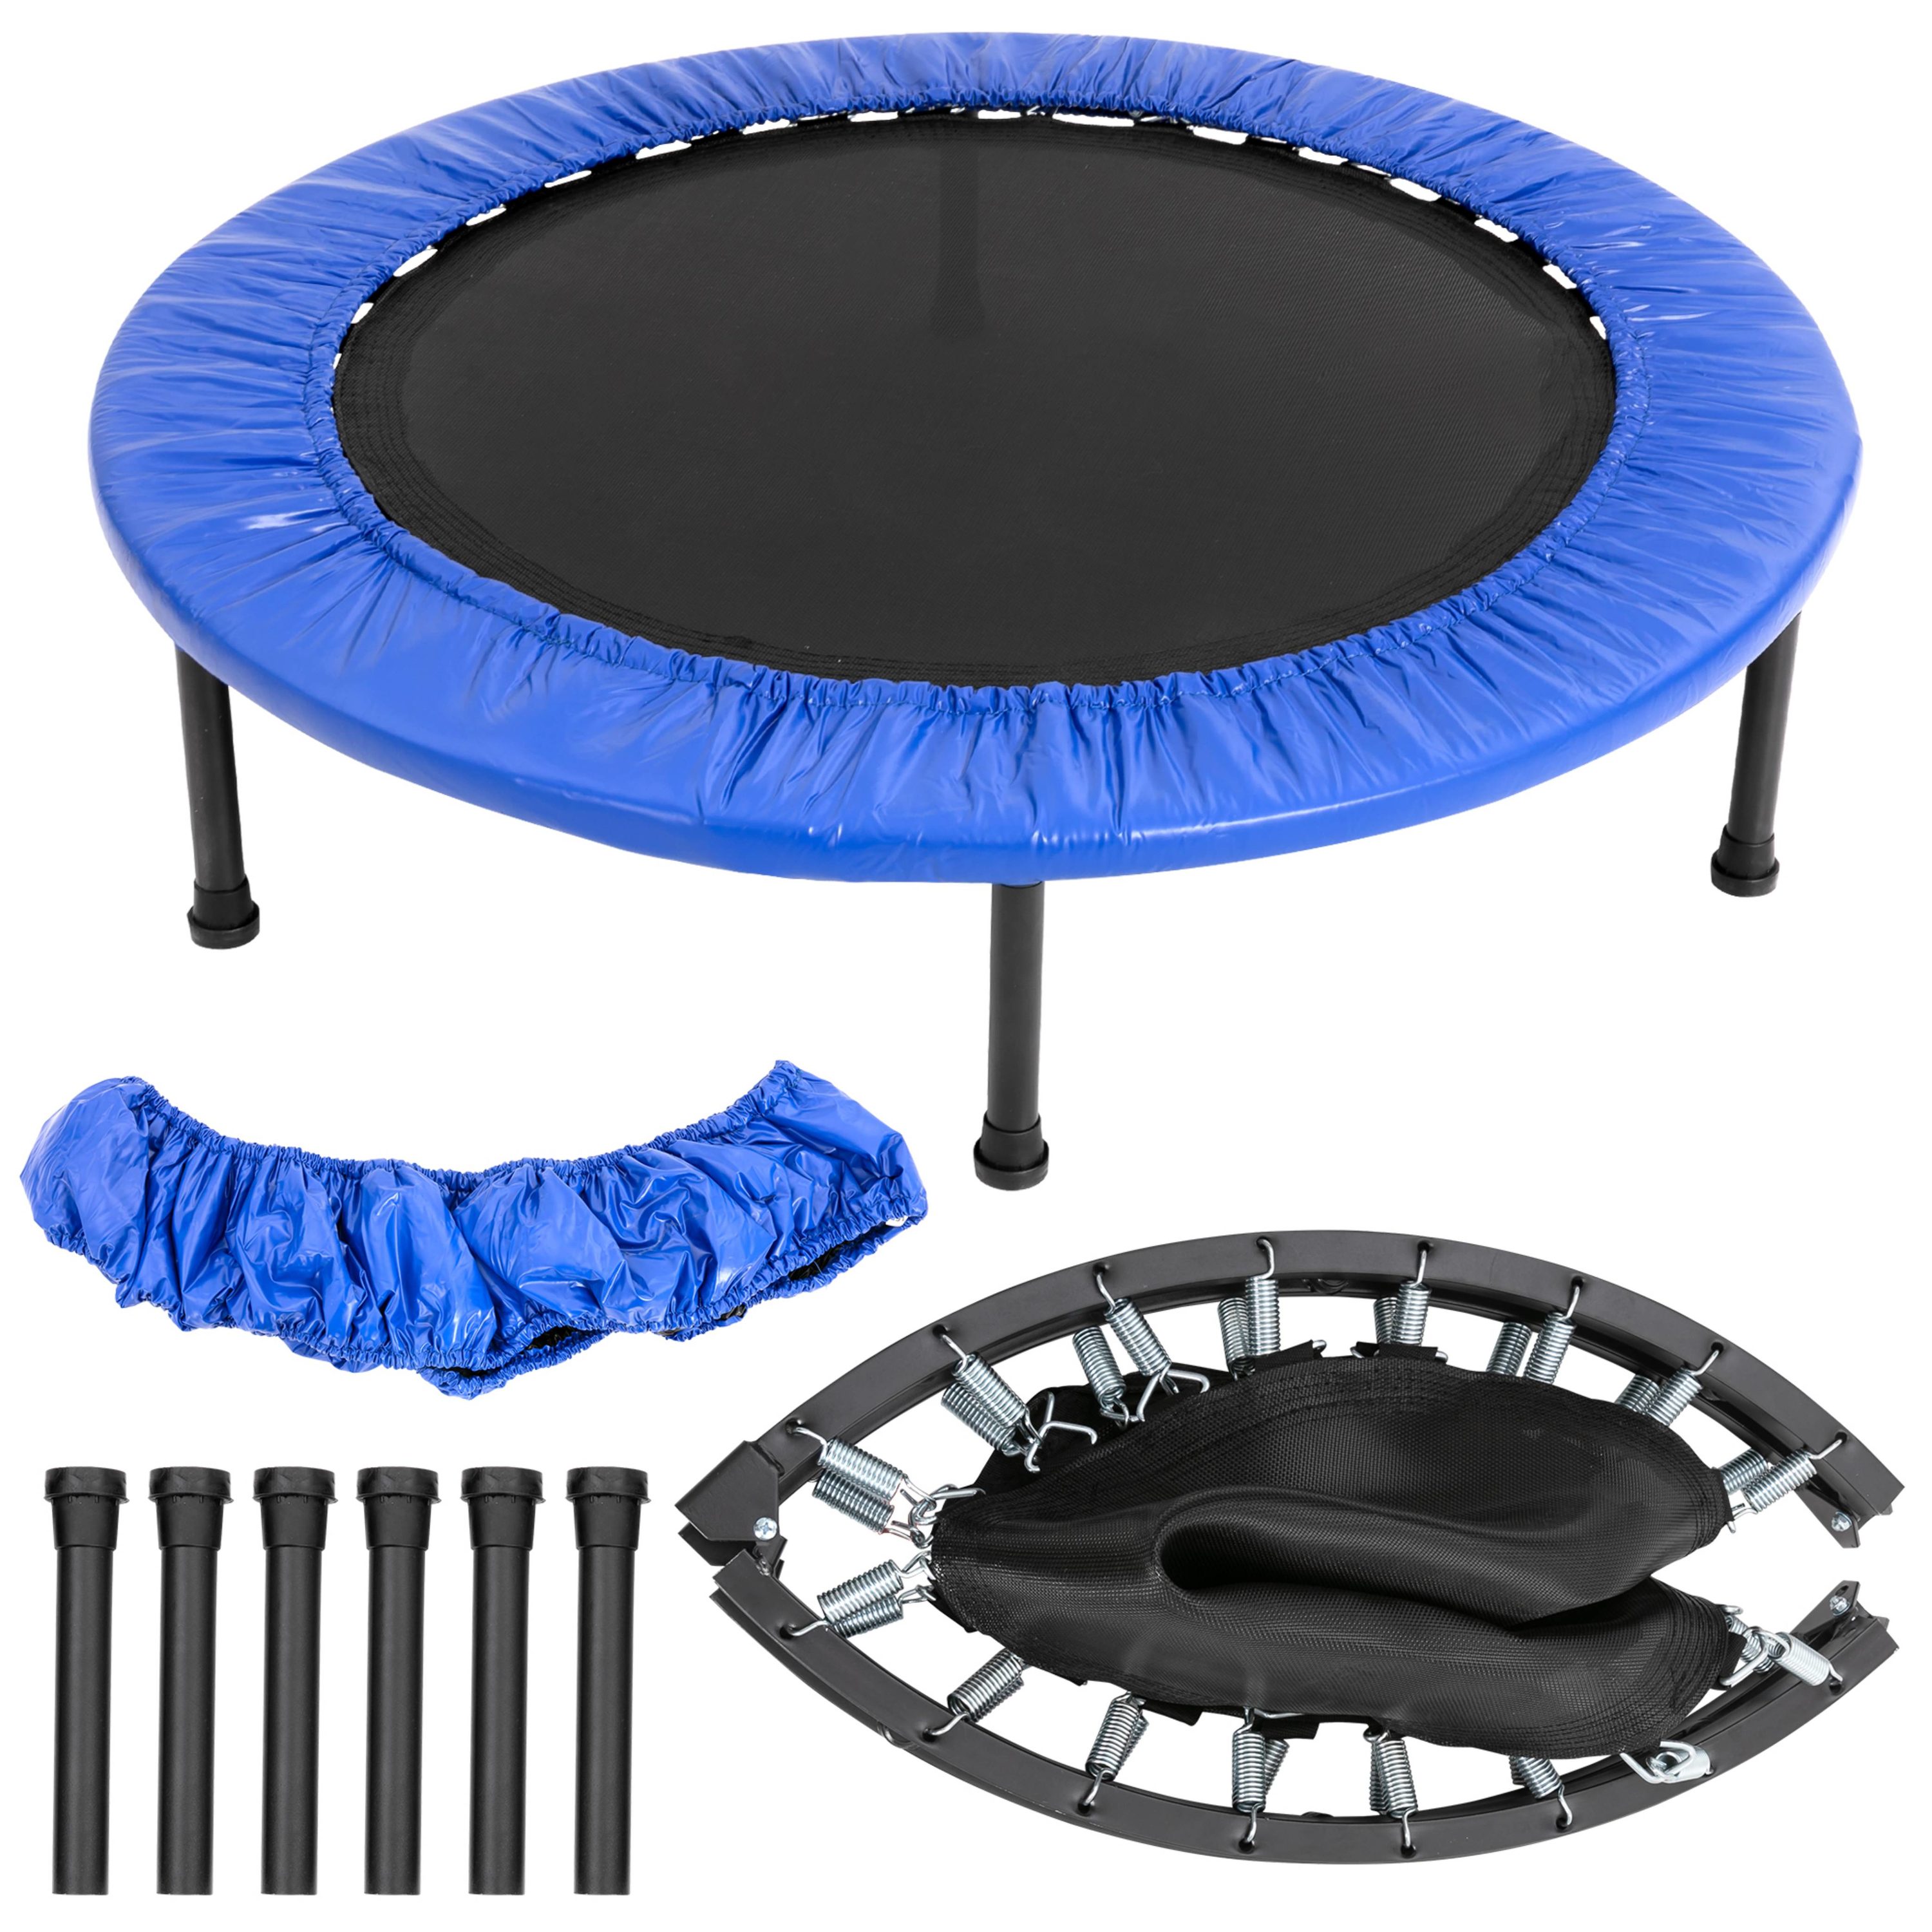 Joyin Turfee 38 in Round Black and Blue Foldable Mini Kids Trampoline Indoor Recreational Trampoline Outdoor for Adults in the Trampolines department Lowes.com